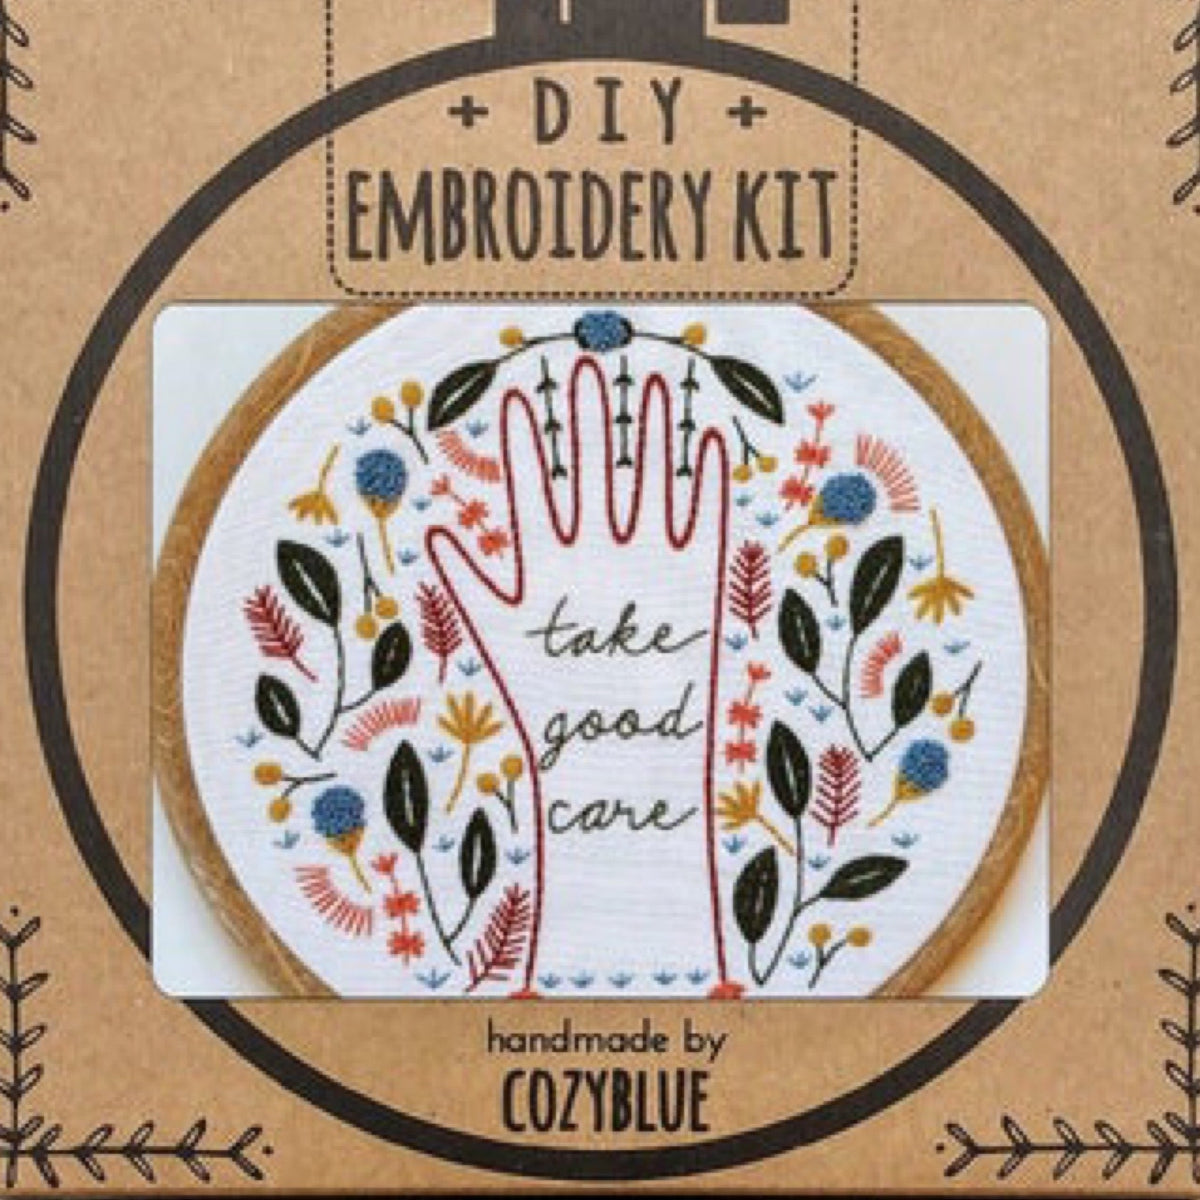 Take Good Care Embroidery Kit